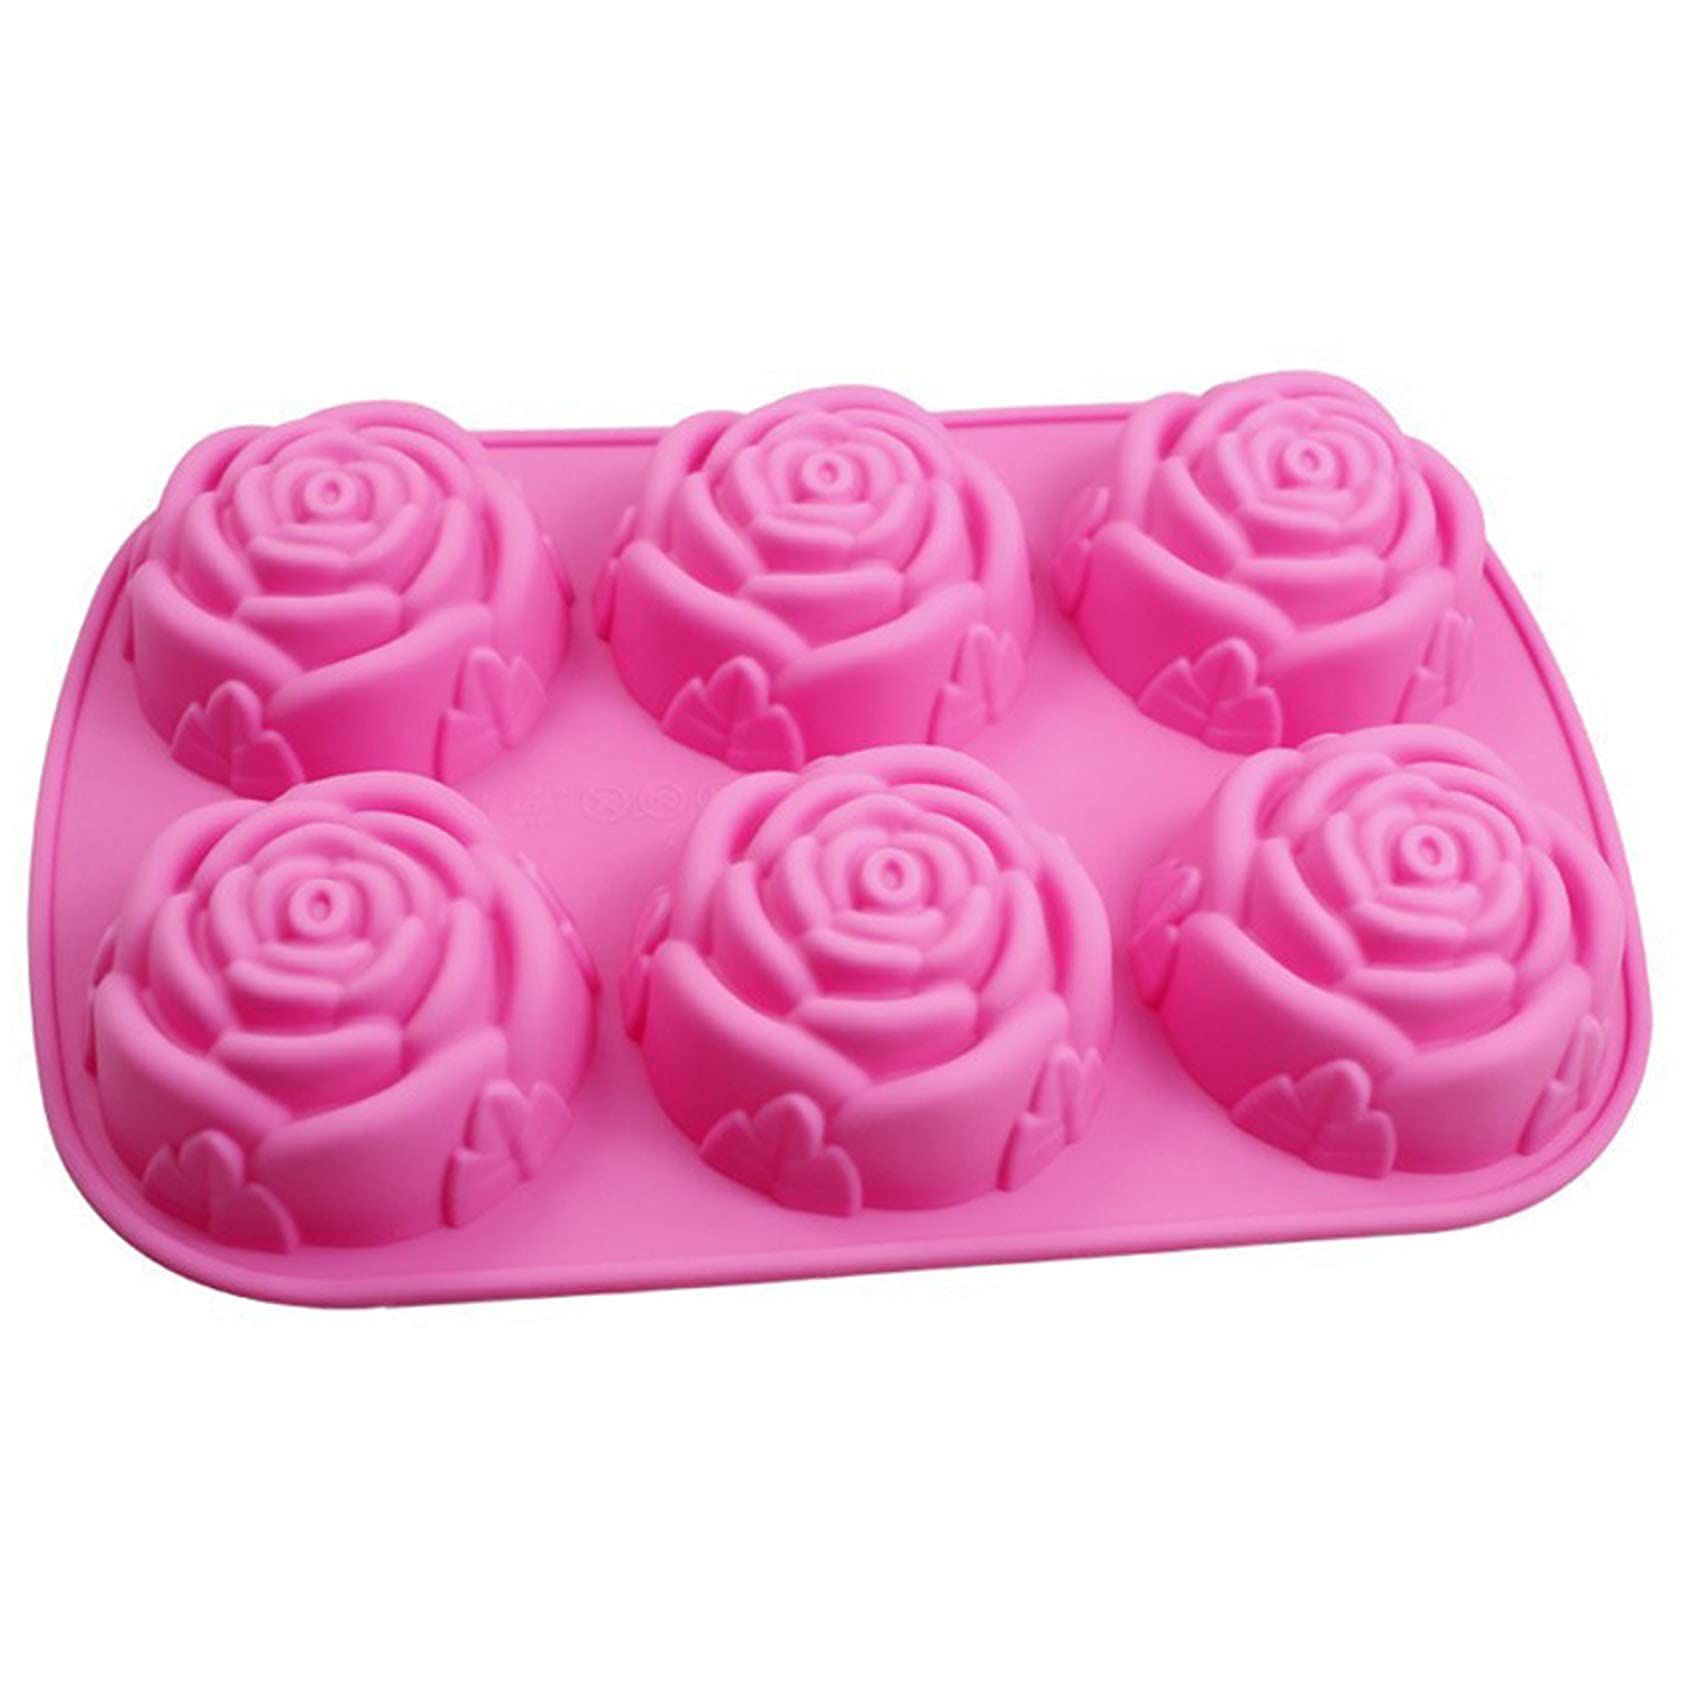 Thaoya Silicone Rose Flower Shape Molds For Homemade Chocolate Cupcake, ​Soap, Bread, ​Cornbread, Bundt Cake, Muffin, Pudding Set of 2 (Rose) (Rose)